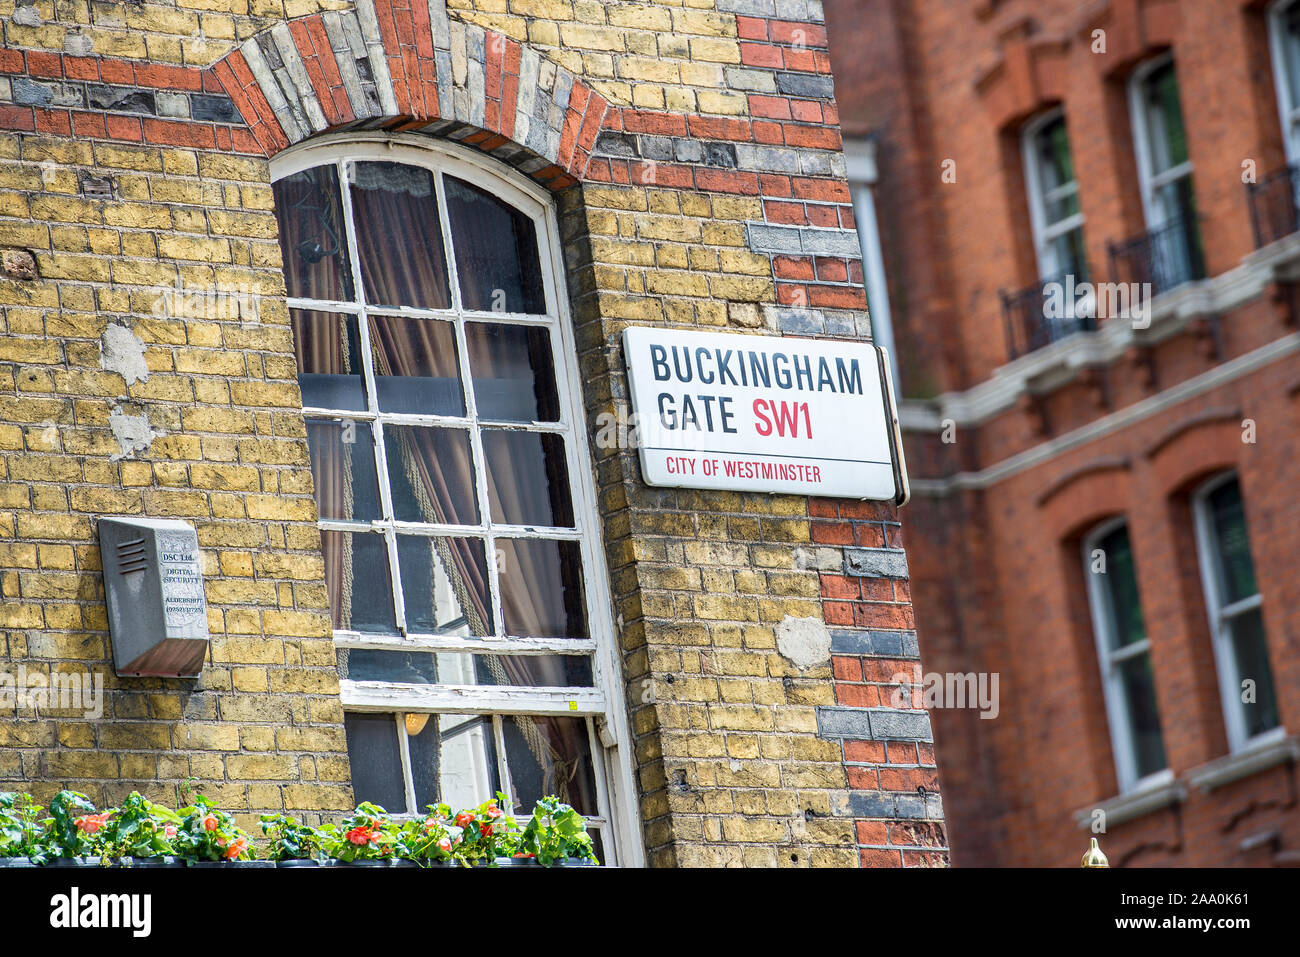 Buckingham Gate street sign attached to the facade of a yellow brick building in a street in Westminster, London Stock Photo